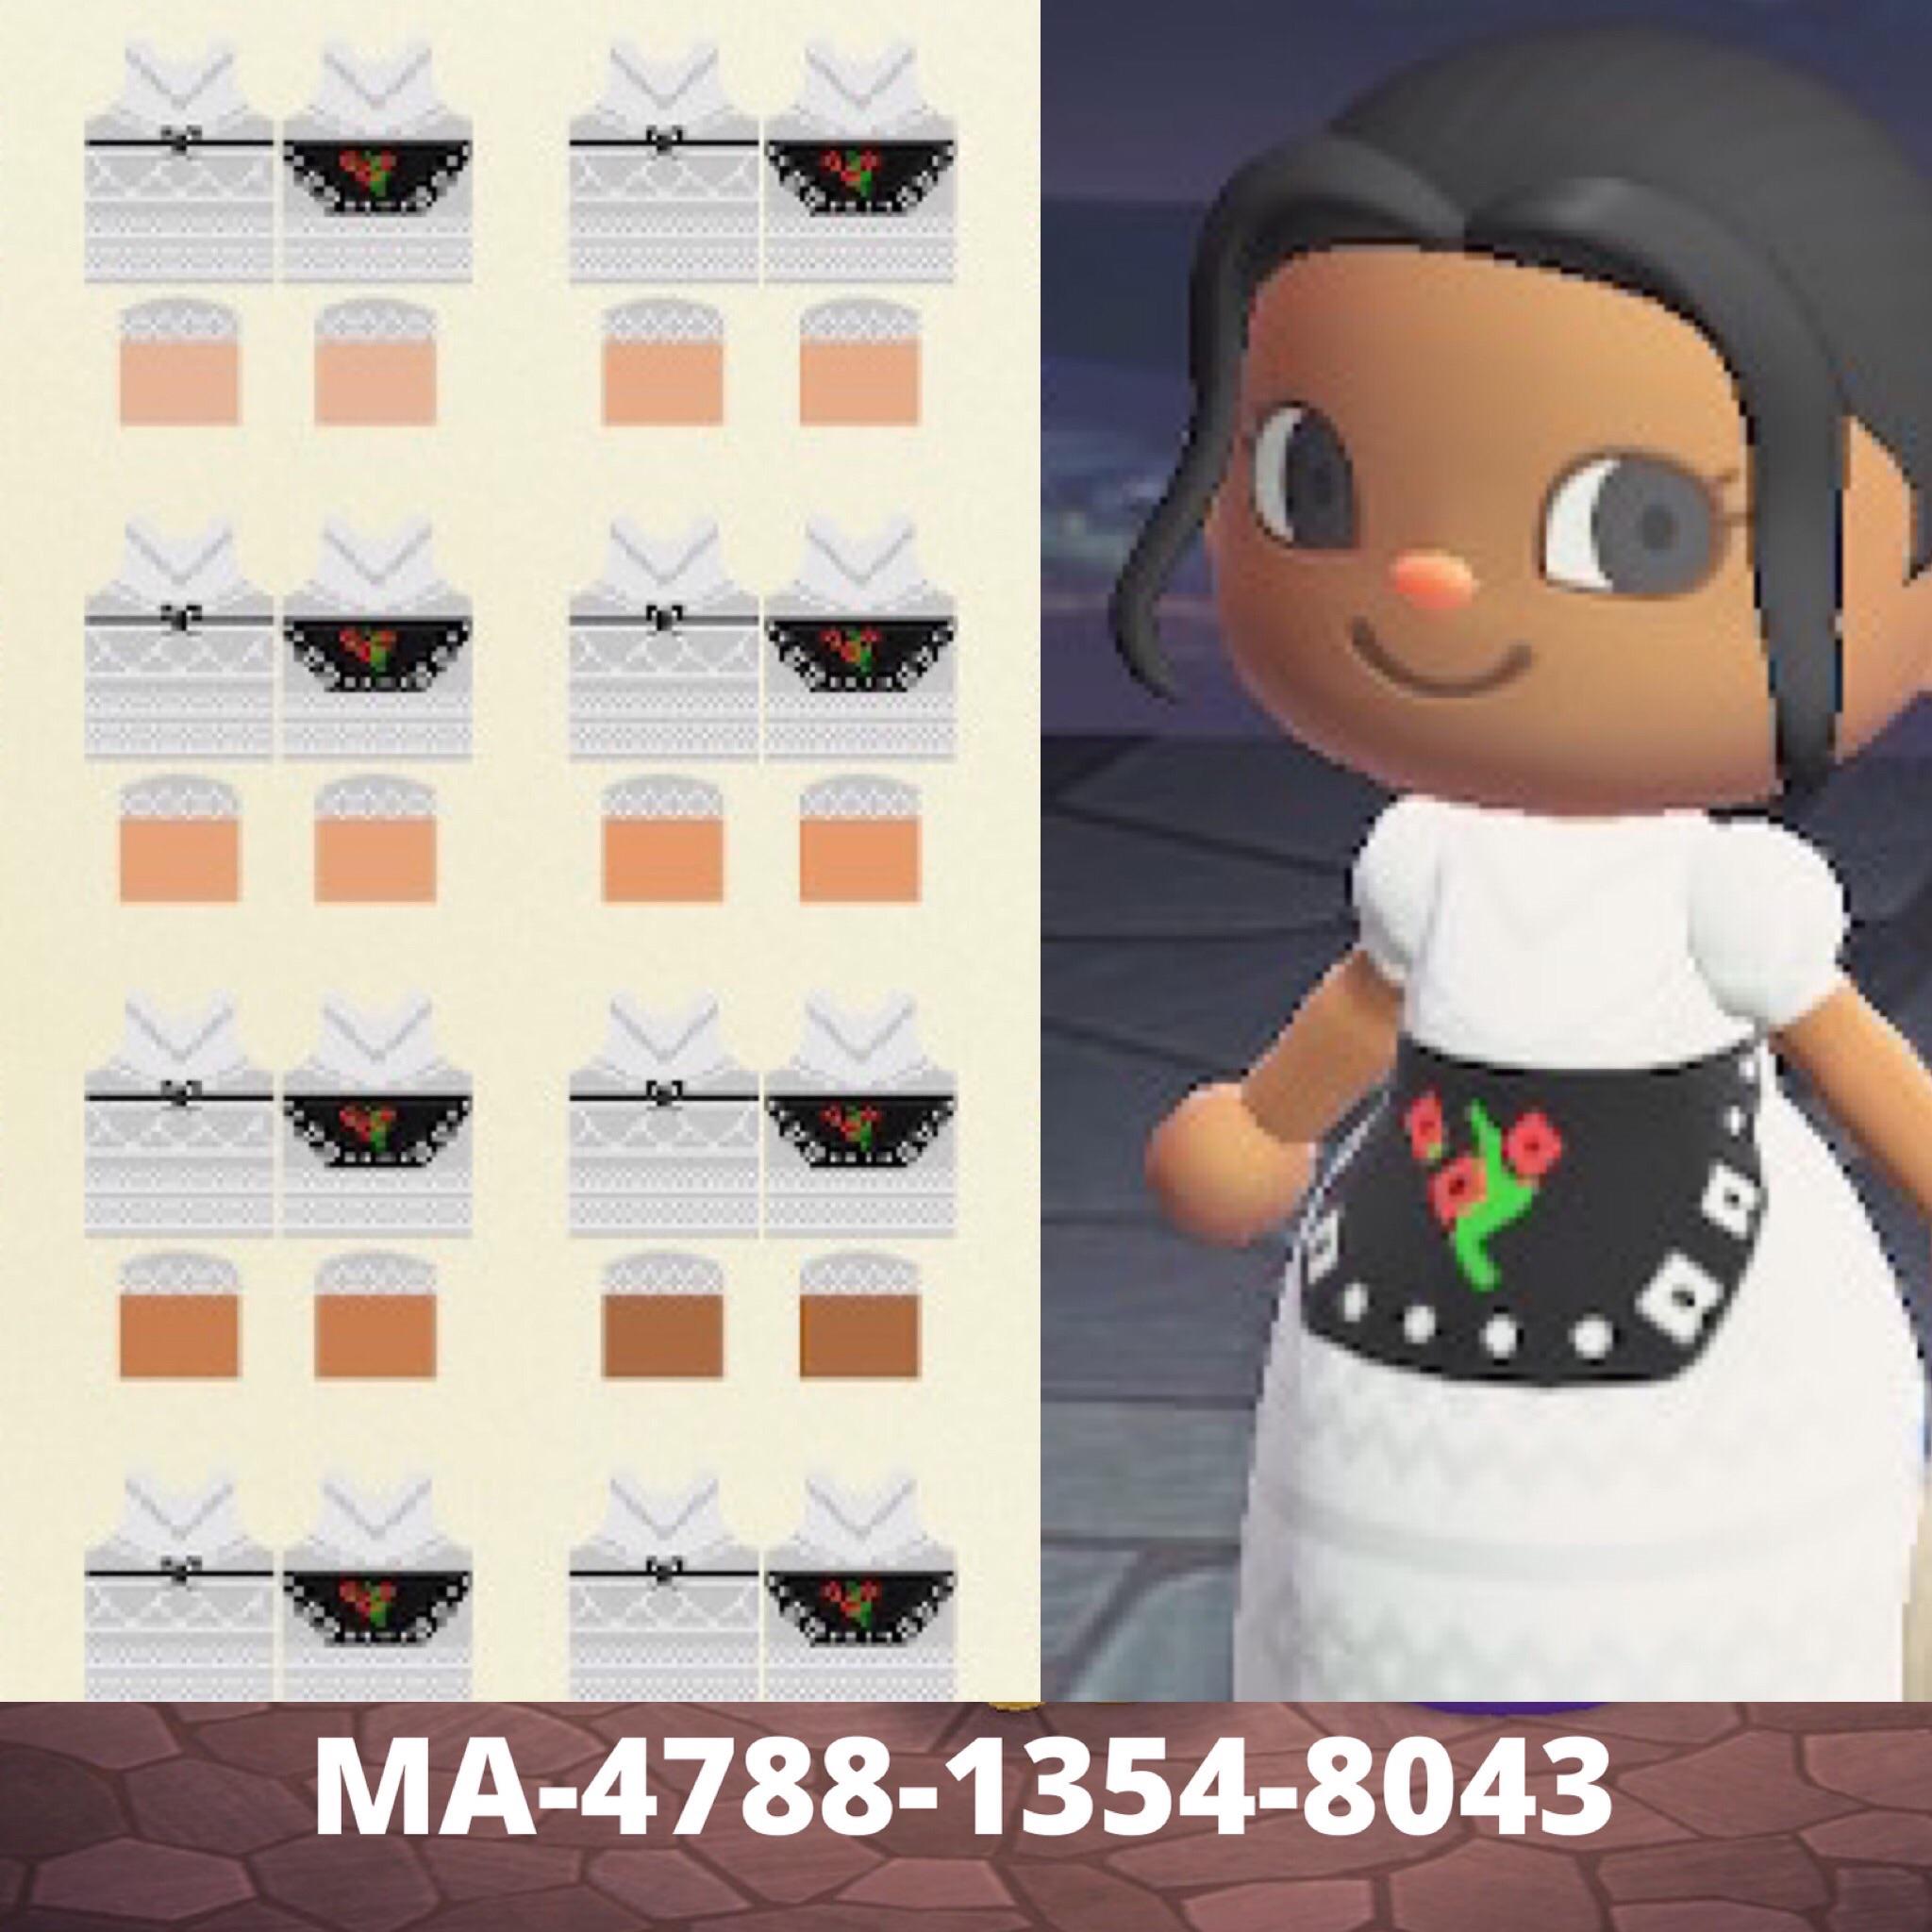 Animal Crossing Mexican dress from Veracruz now available in 8